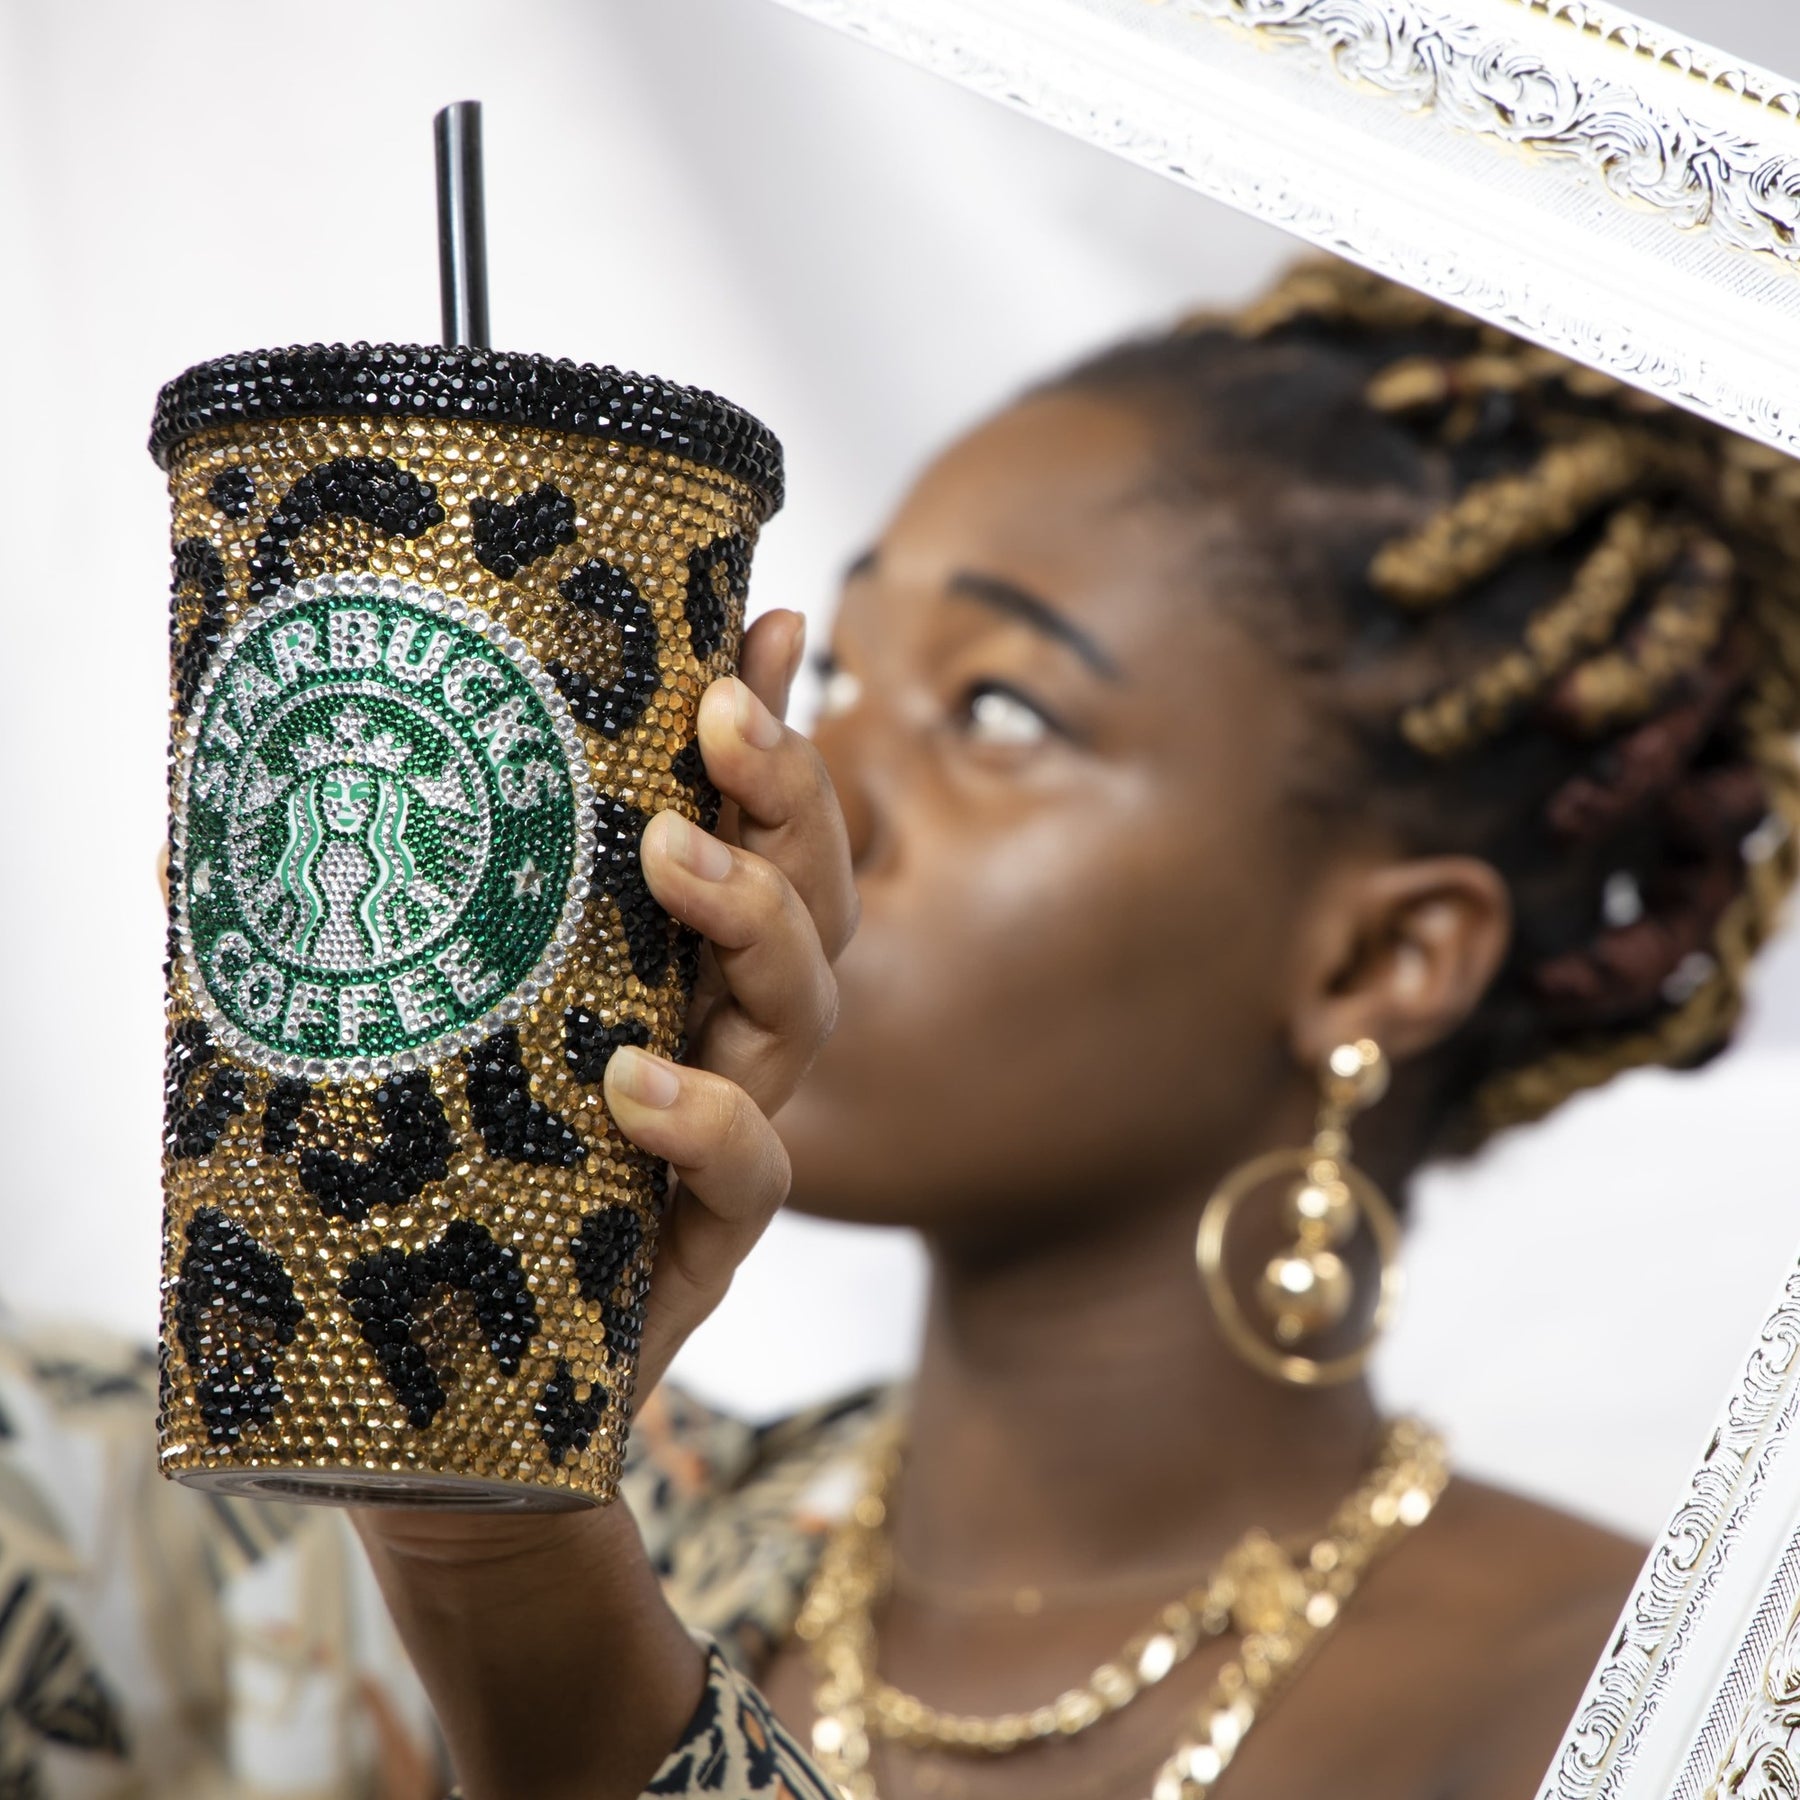 Cheetah Reusable Starbucks Venti Cold Cup / Grande Hot Cup! Leopard  Reusable cup, Teacher Gift, Mothers day, Animal Print, Birthday gift